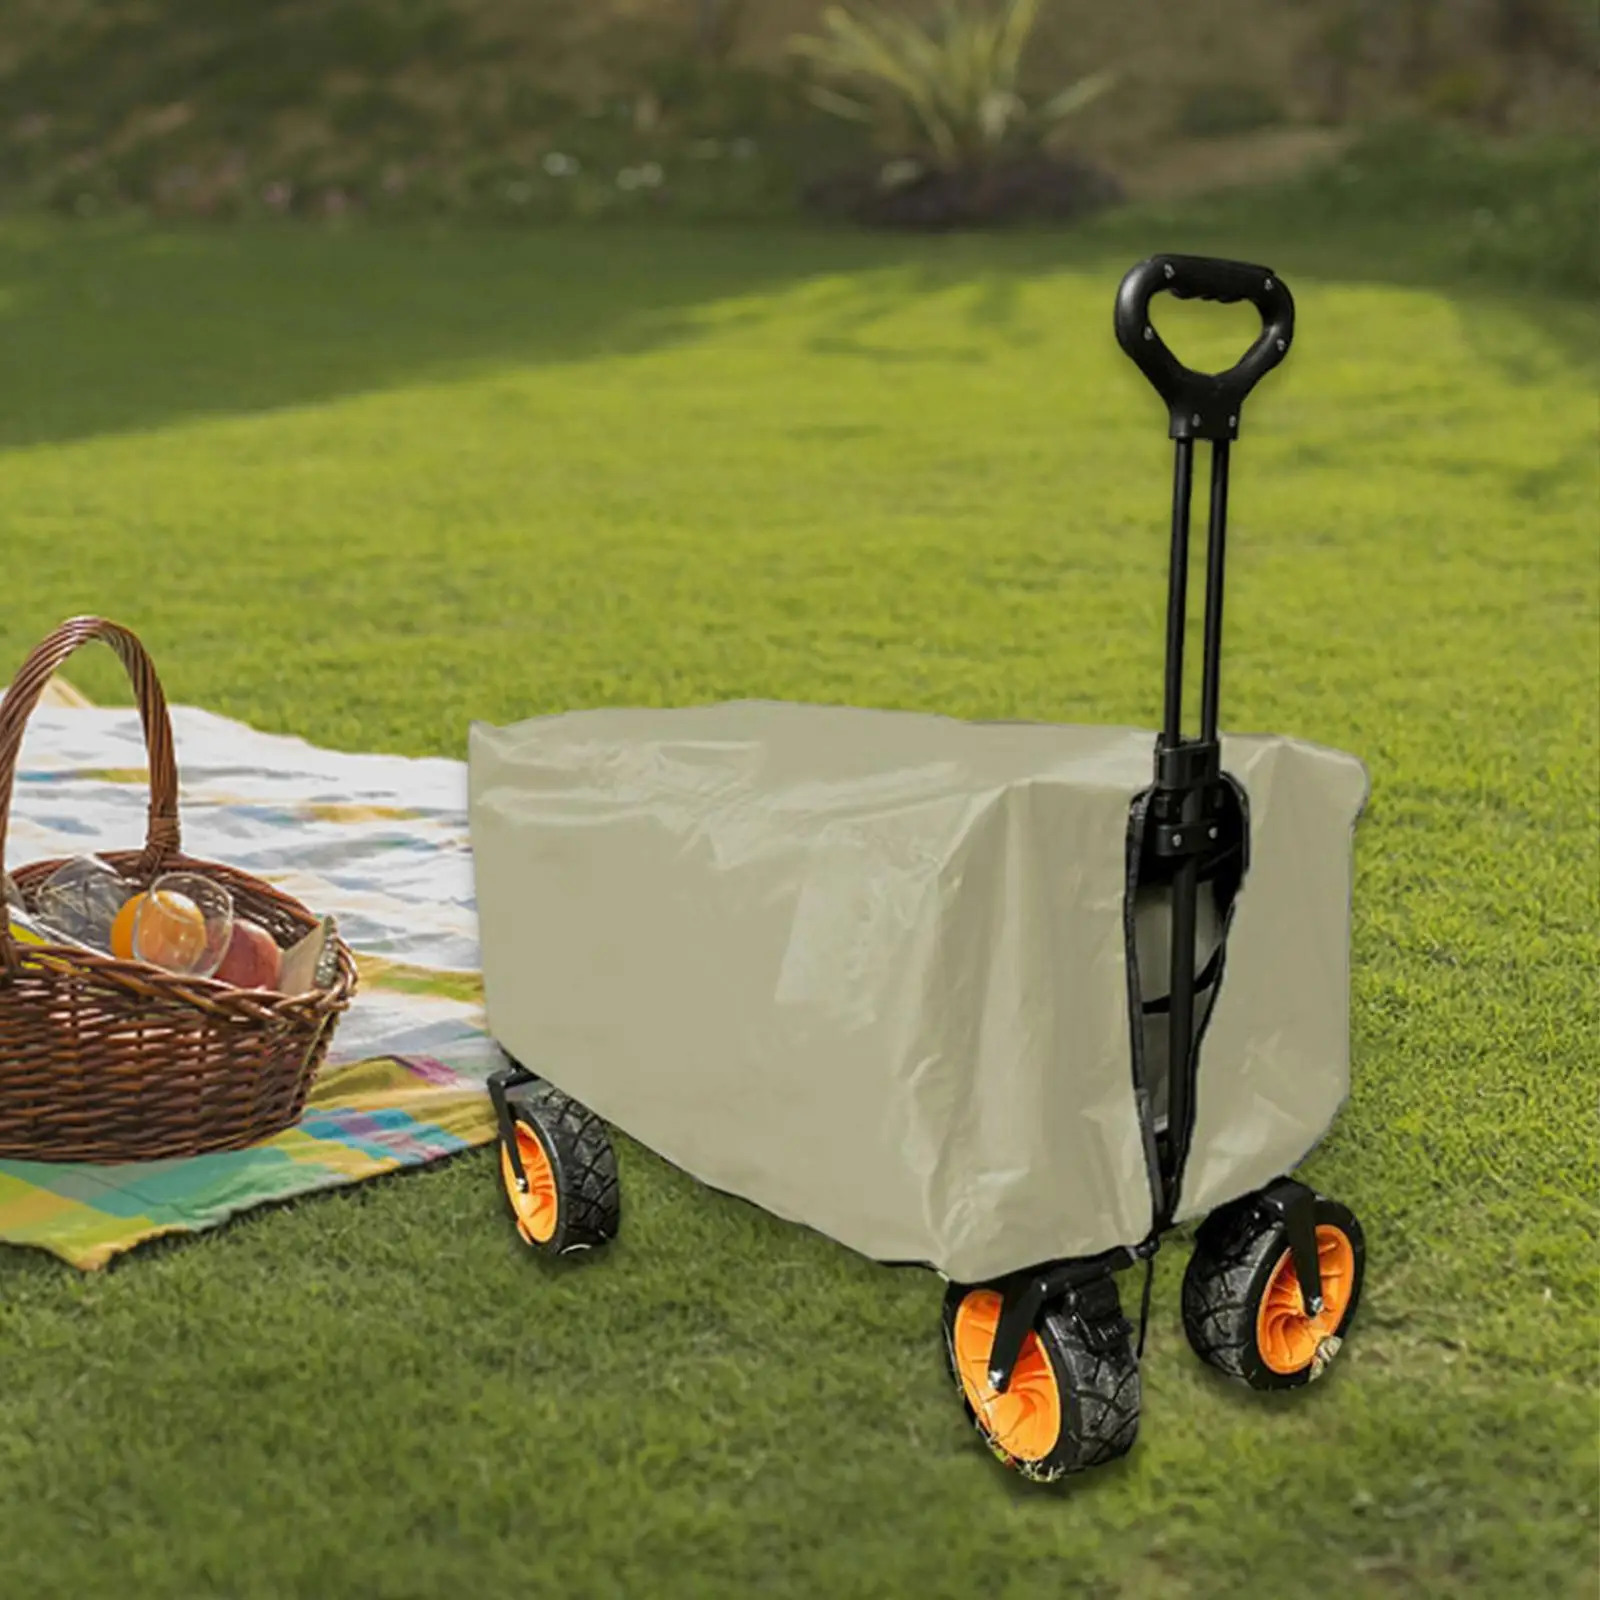 Outdoor Folding Wagon Cover Protective Cover 90x50x45cm Easily Install Accessory Sturdy Waterproof for Collapsible Utility Wagon